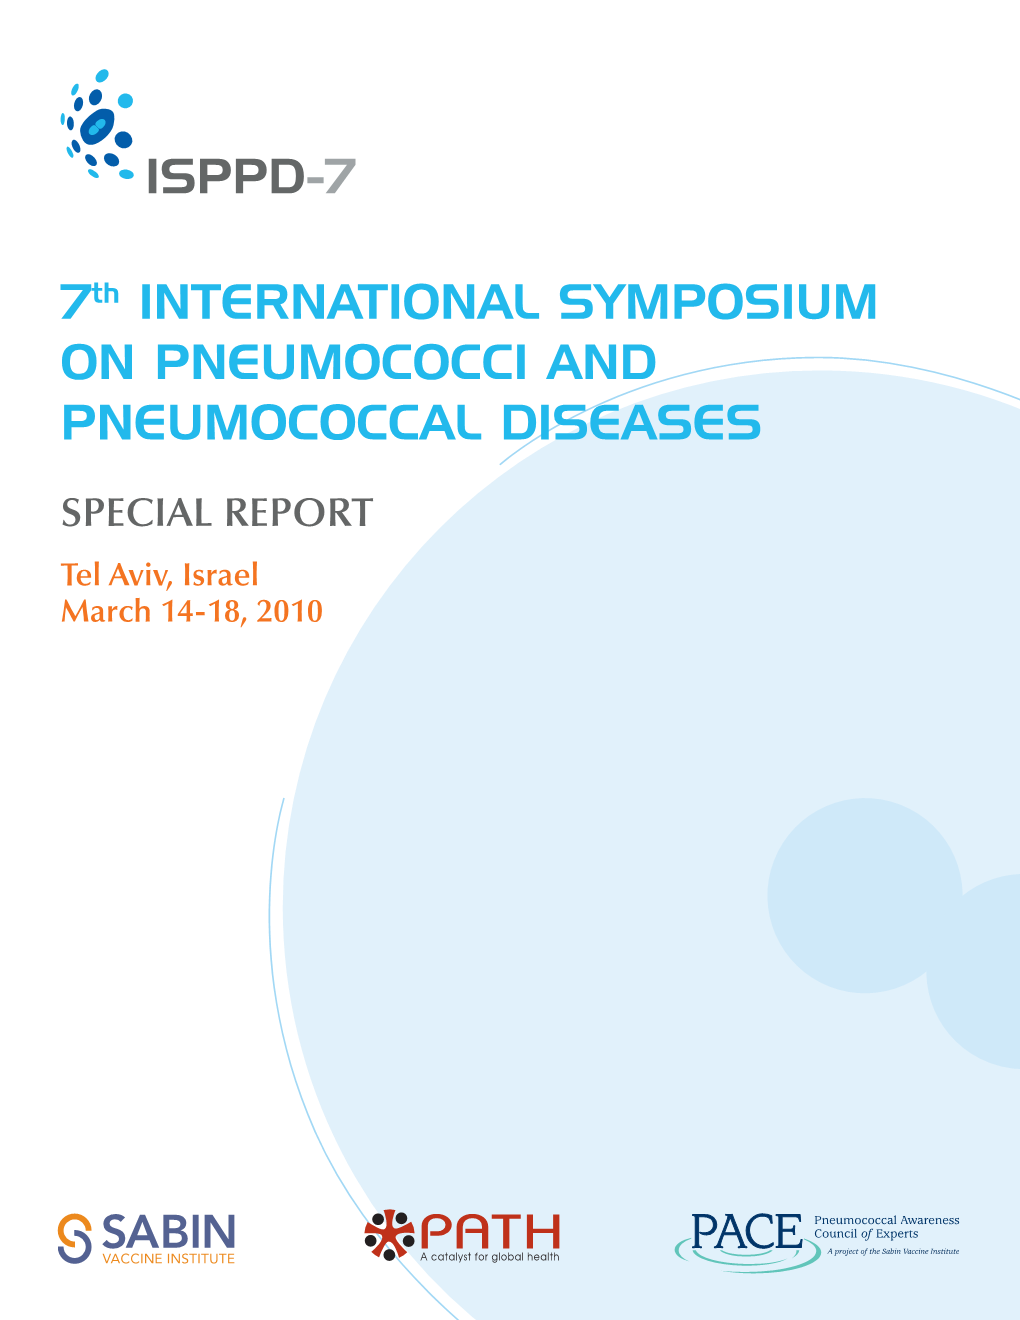 Special Report: 7Th International Symposium on Pneumococci and Pneumococcal Diseases